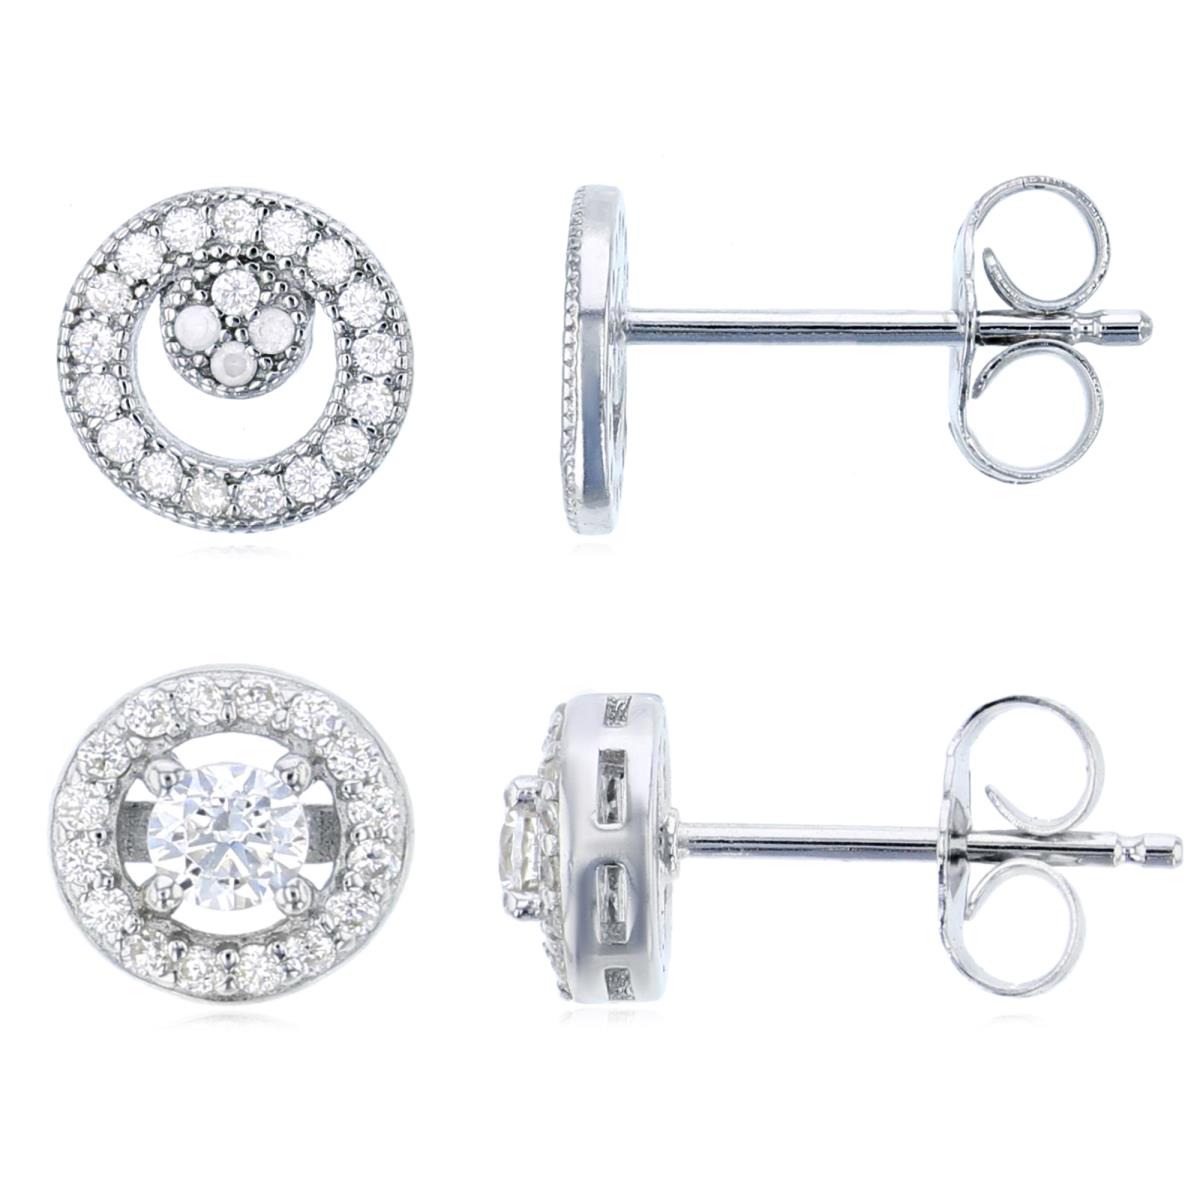 Sterling Silver Rhodium 7.70MMX7.70MM;7.30 White Cz Pave Halo Stud Earring Set